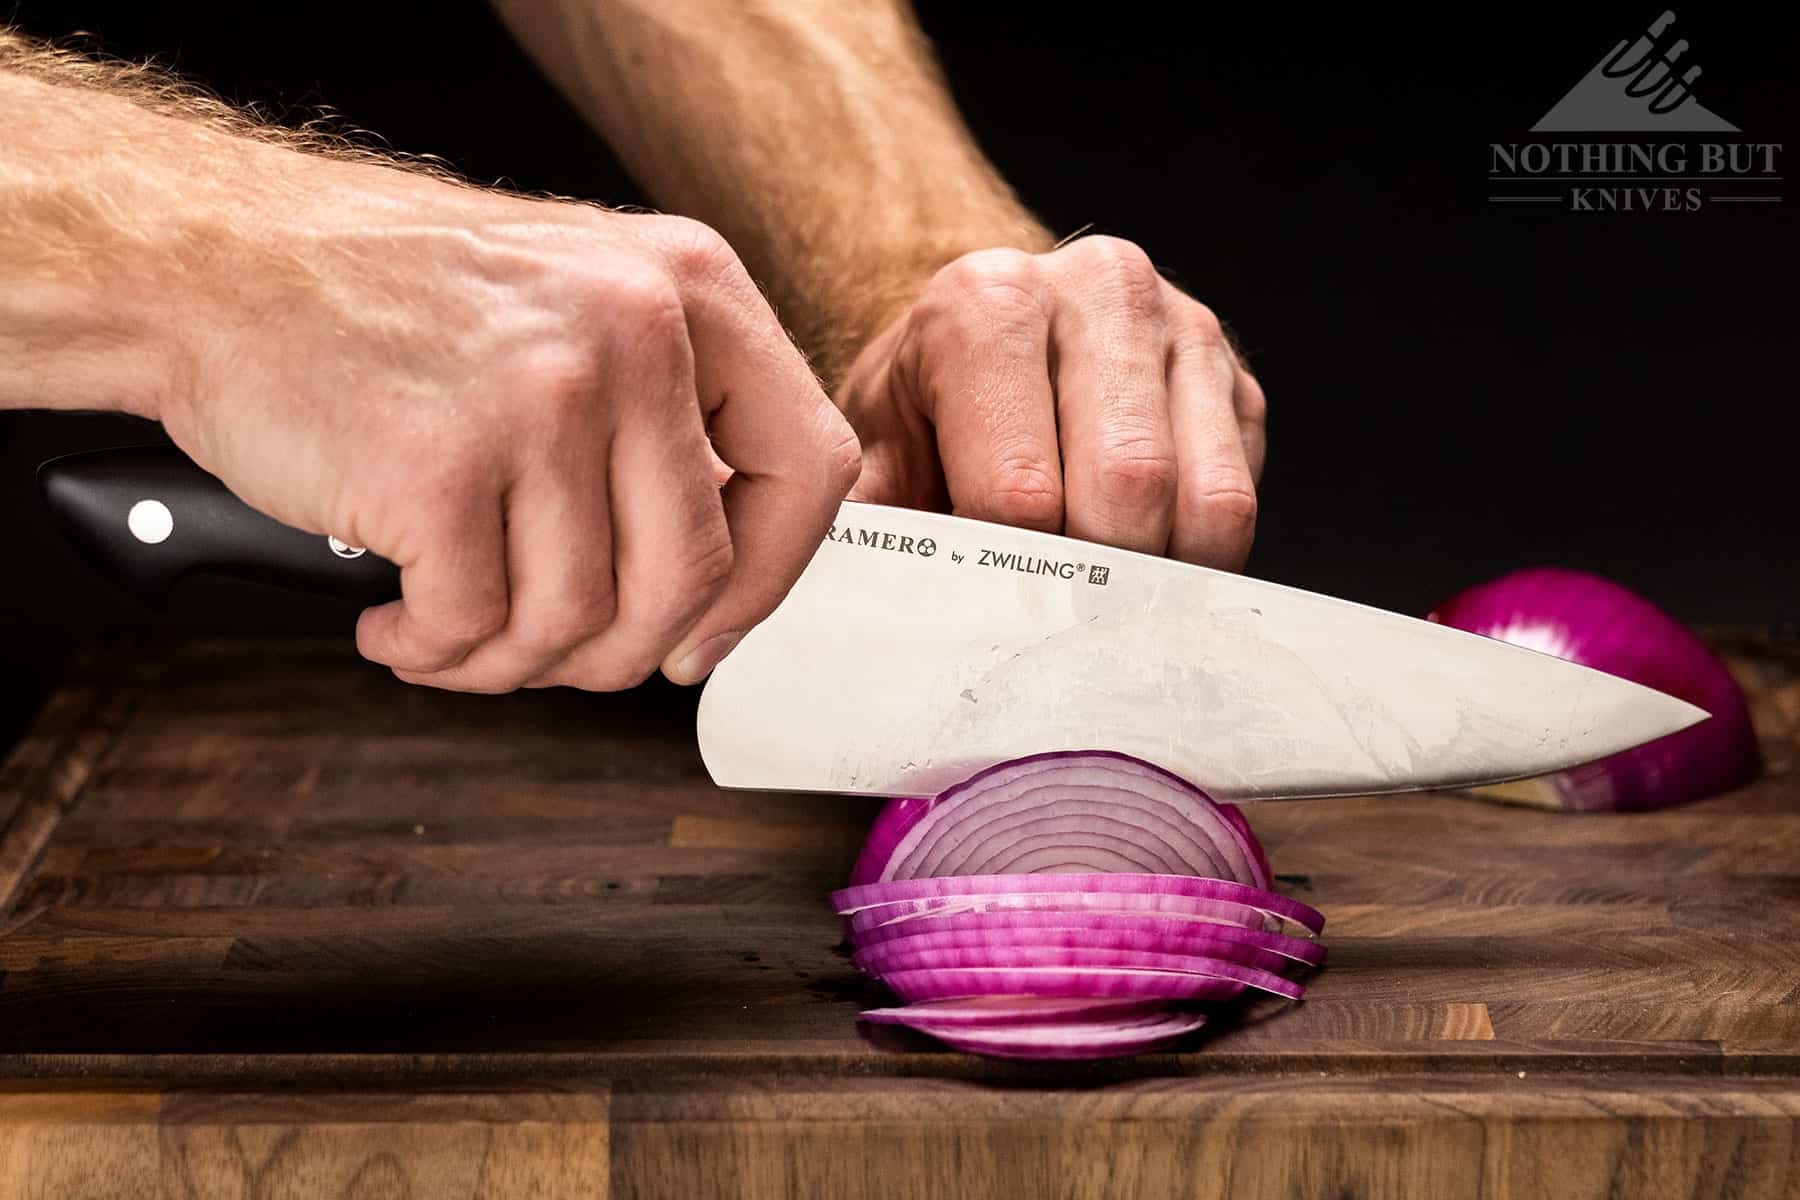 Utilizing the pinch grip while slicing a red onion with a Zwilling Kramer chef knife.